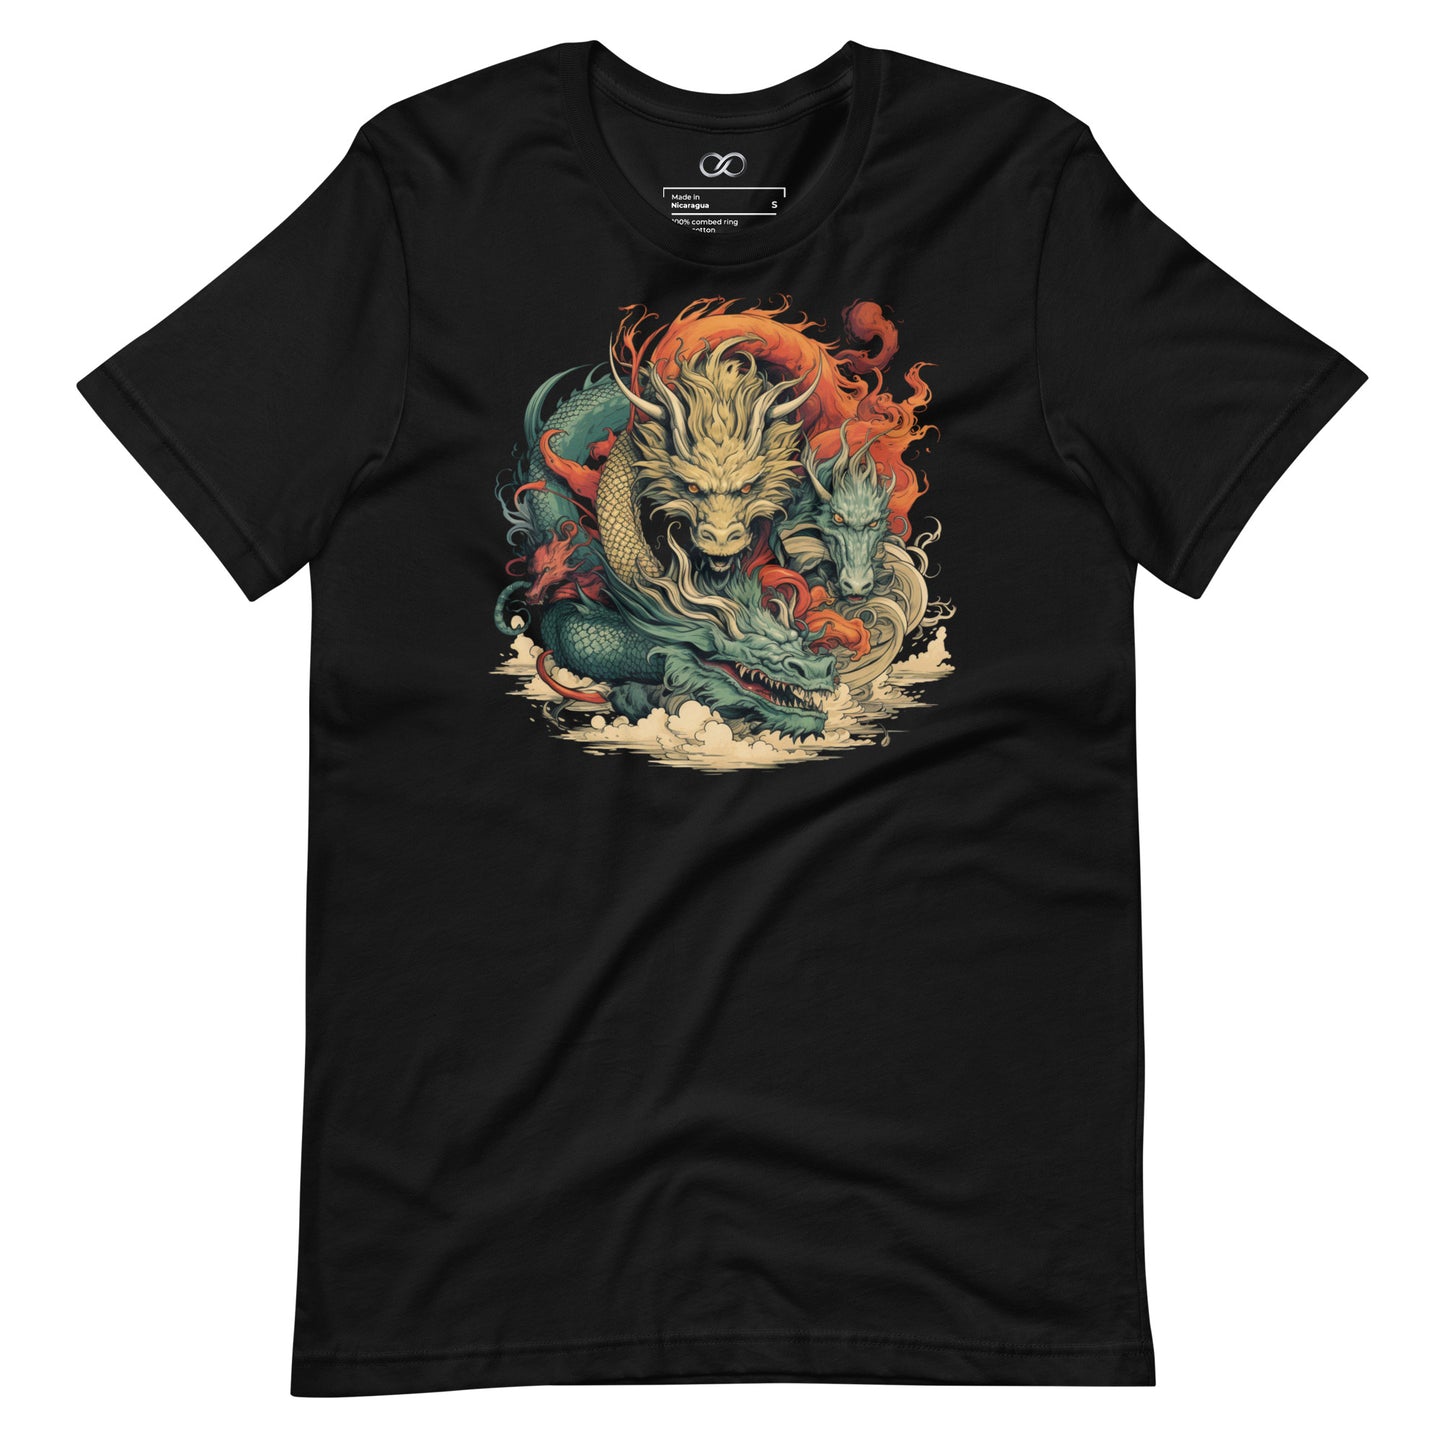 Mythical Beasts T-Shirt - Fantasy Dragons Graphic Tee